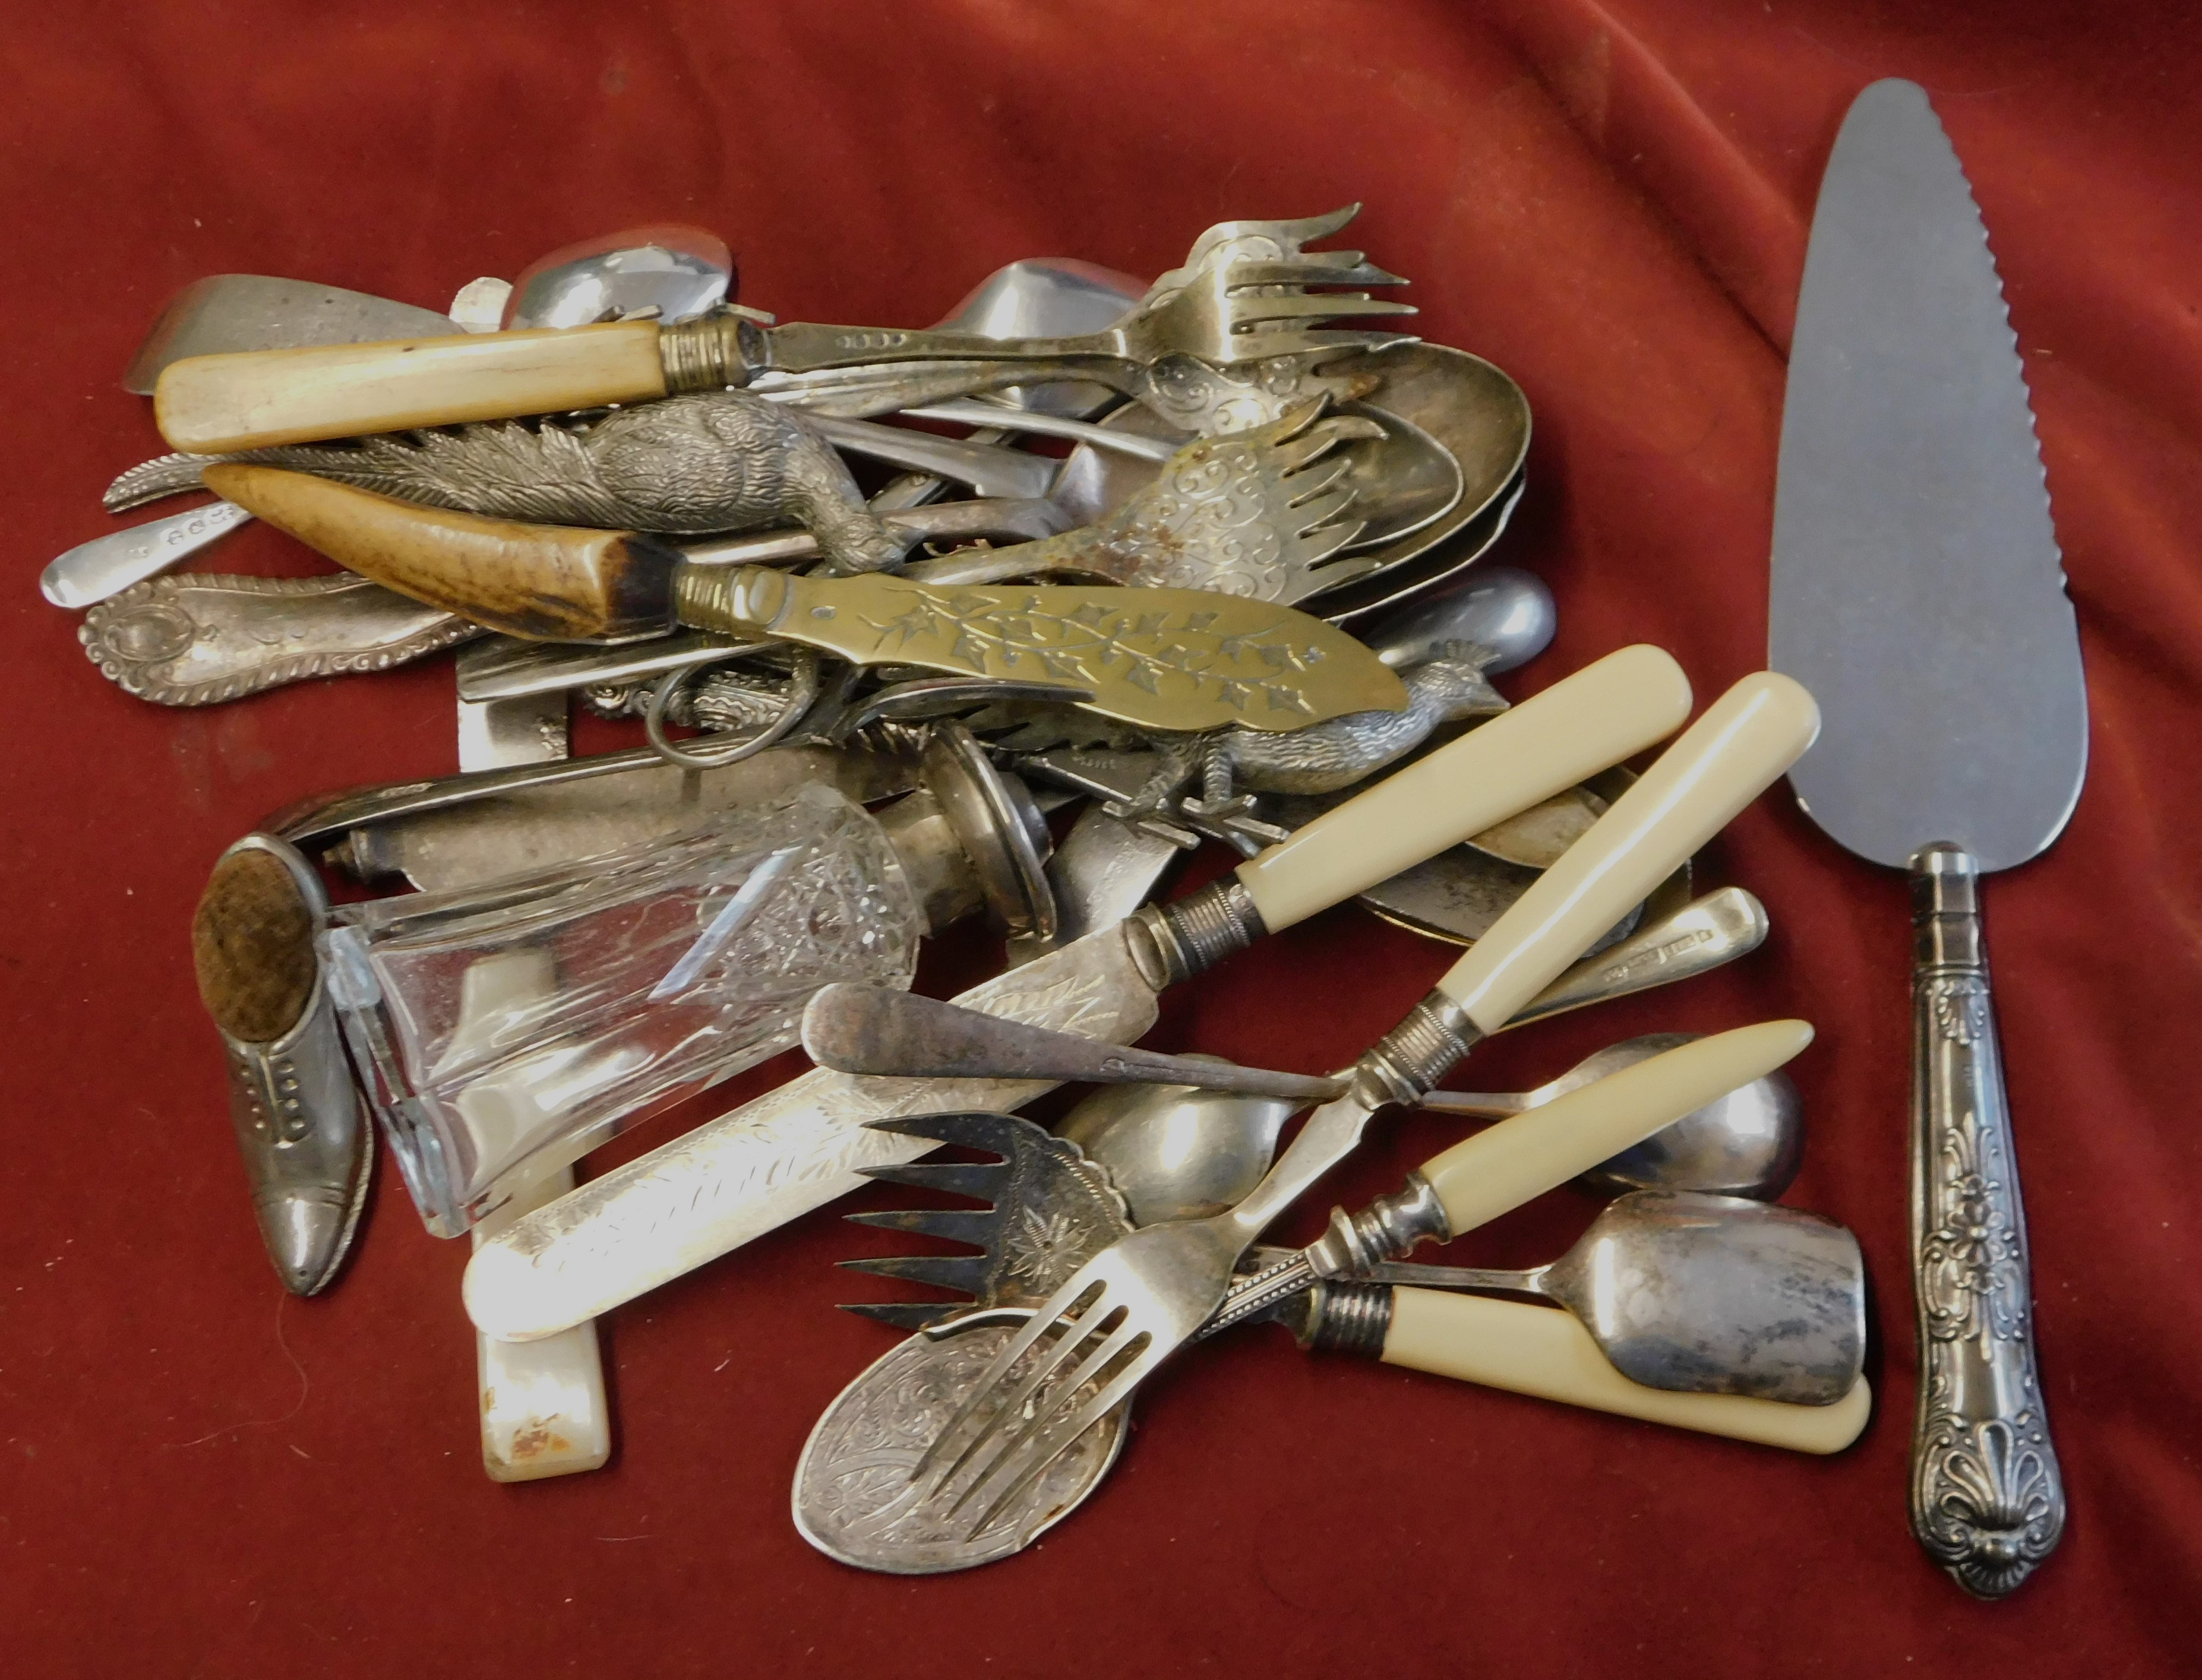 Assortment of Cutlery - Knives, Forks, Spoons plus etc